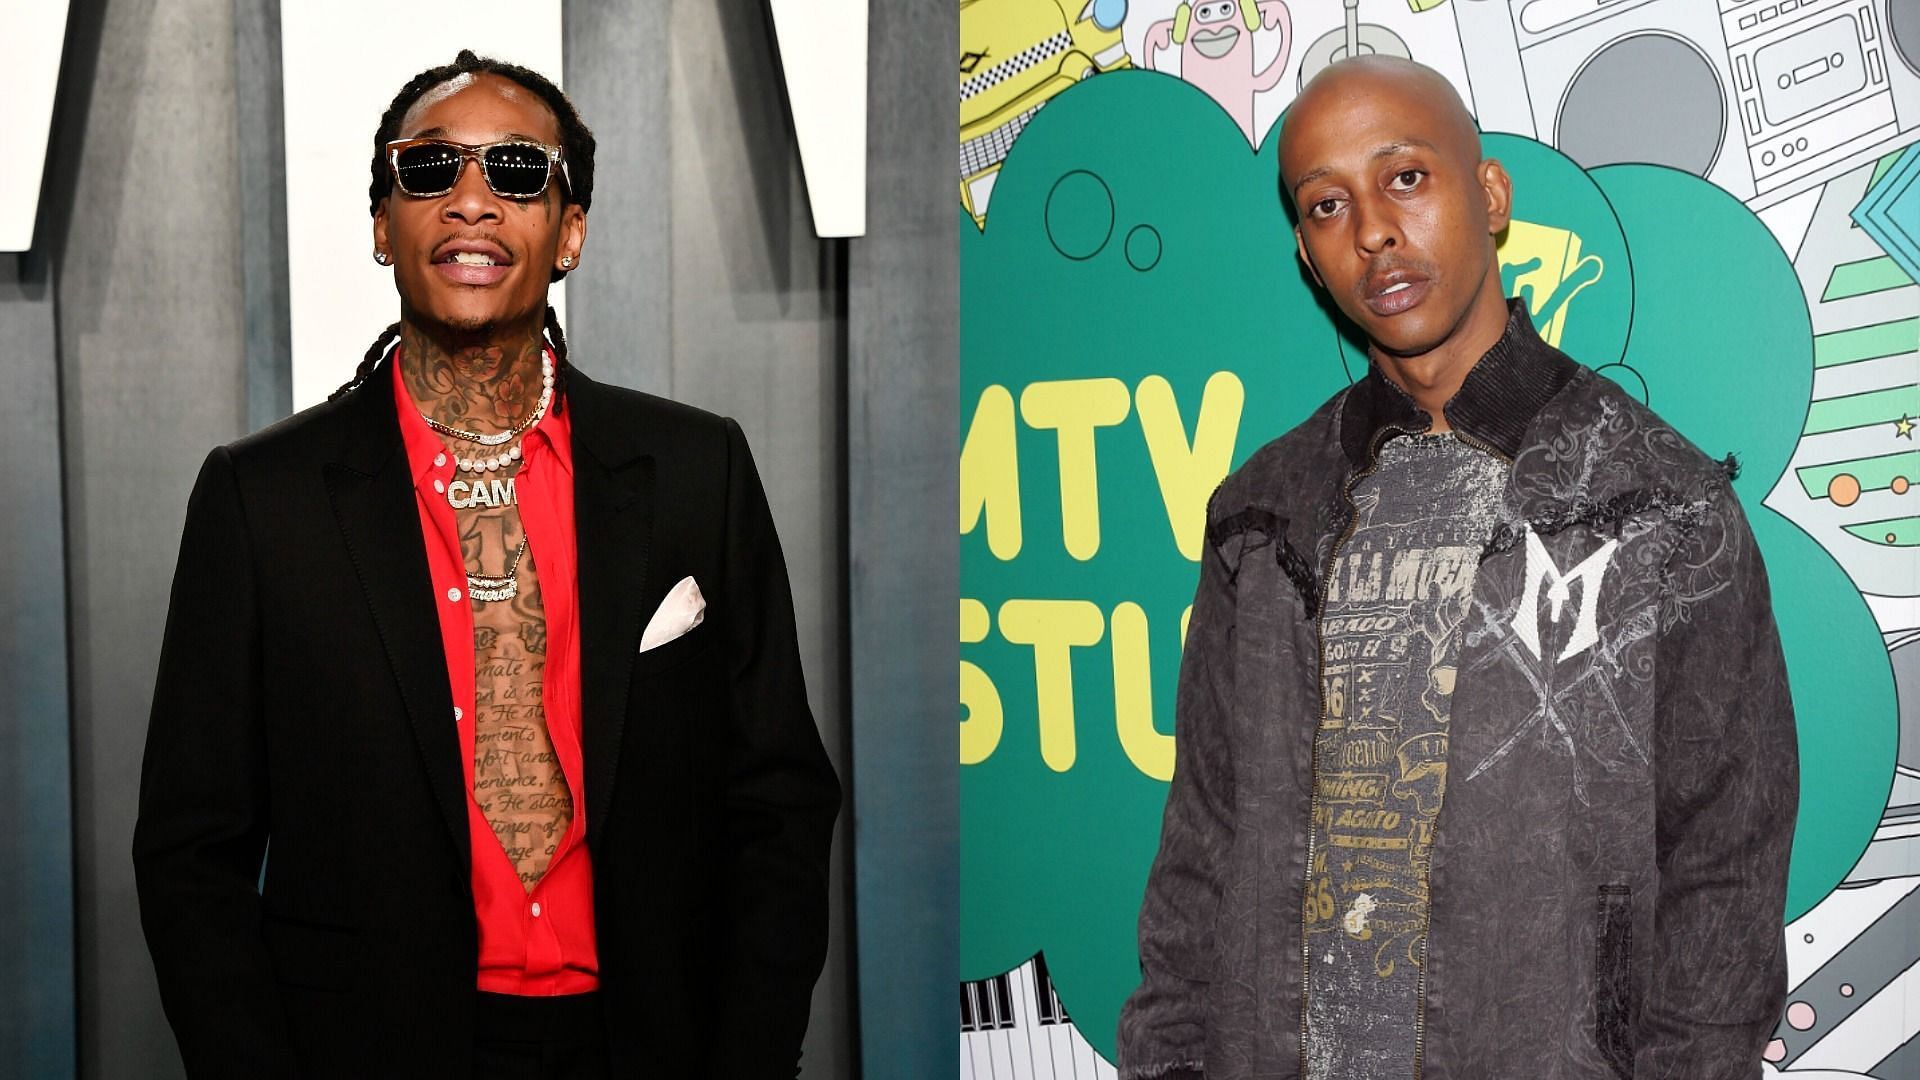 Wiz Khalifa was mocked by Gillie Da Kid for inappropriate gym attire (Image via Frazer Harrison and Scott Gries/Getty Images)